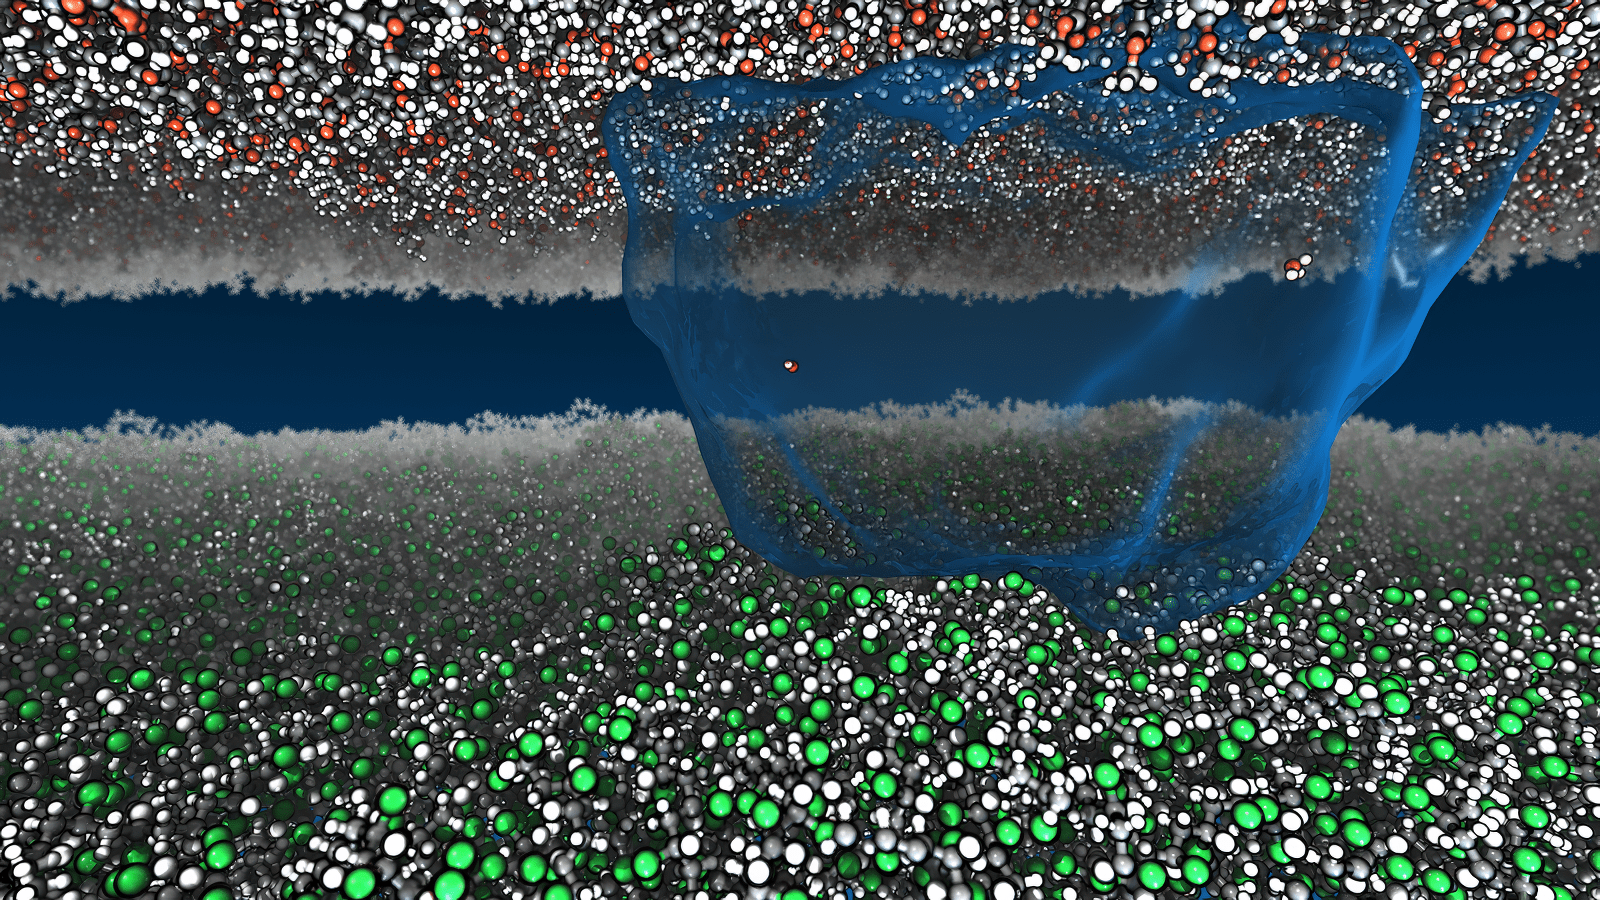 Computer simulation graphic showing hundreds of thousands of atoms in two planes, representing two surfaces, with an abstract web-like channel showing how charge carriers move between the surfaces.